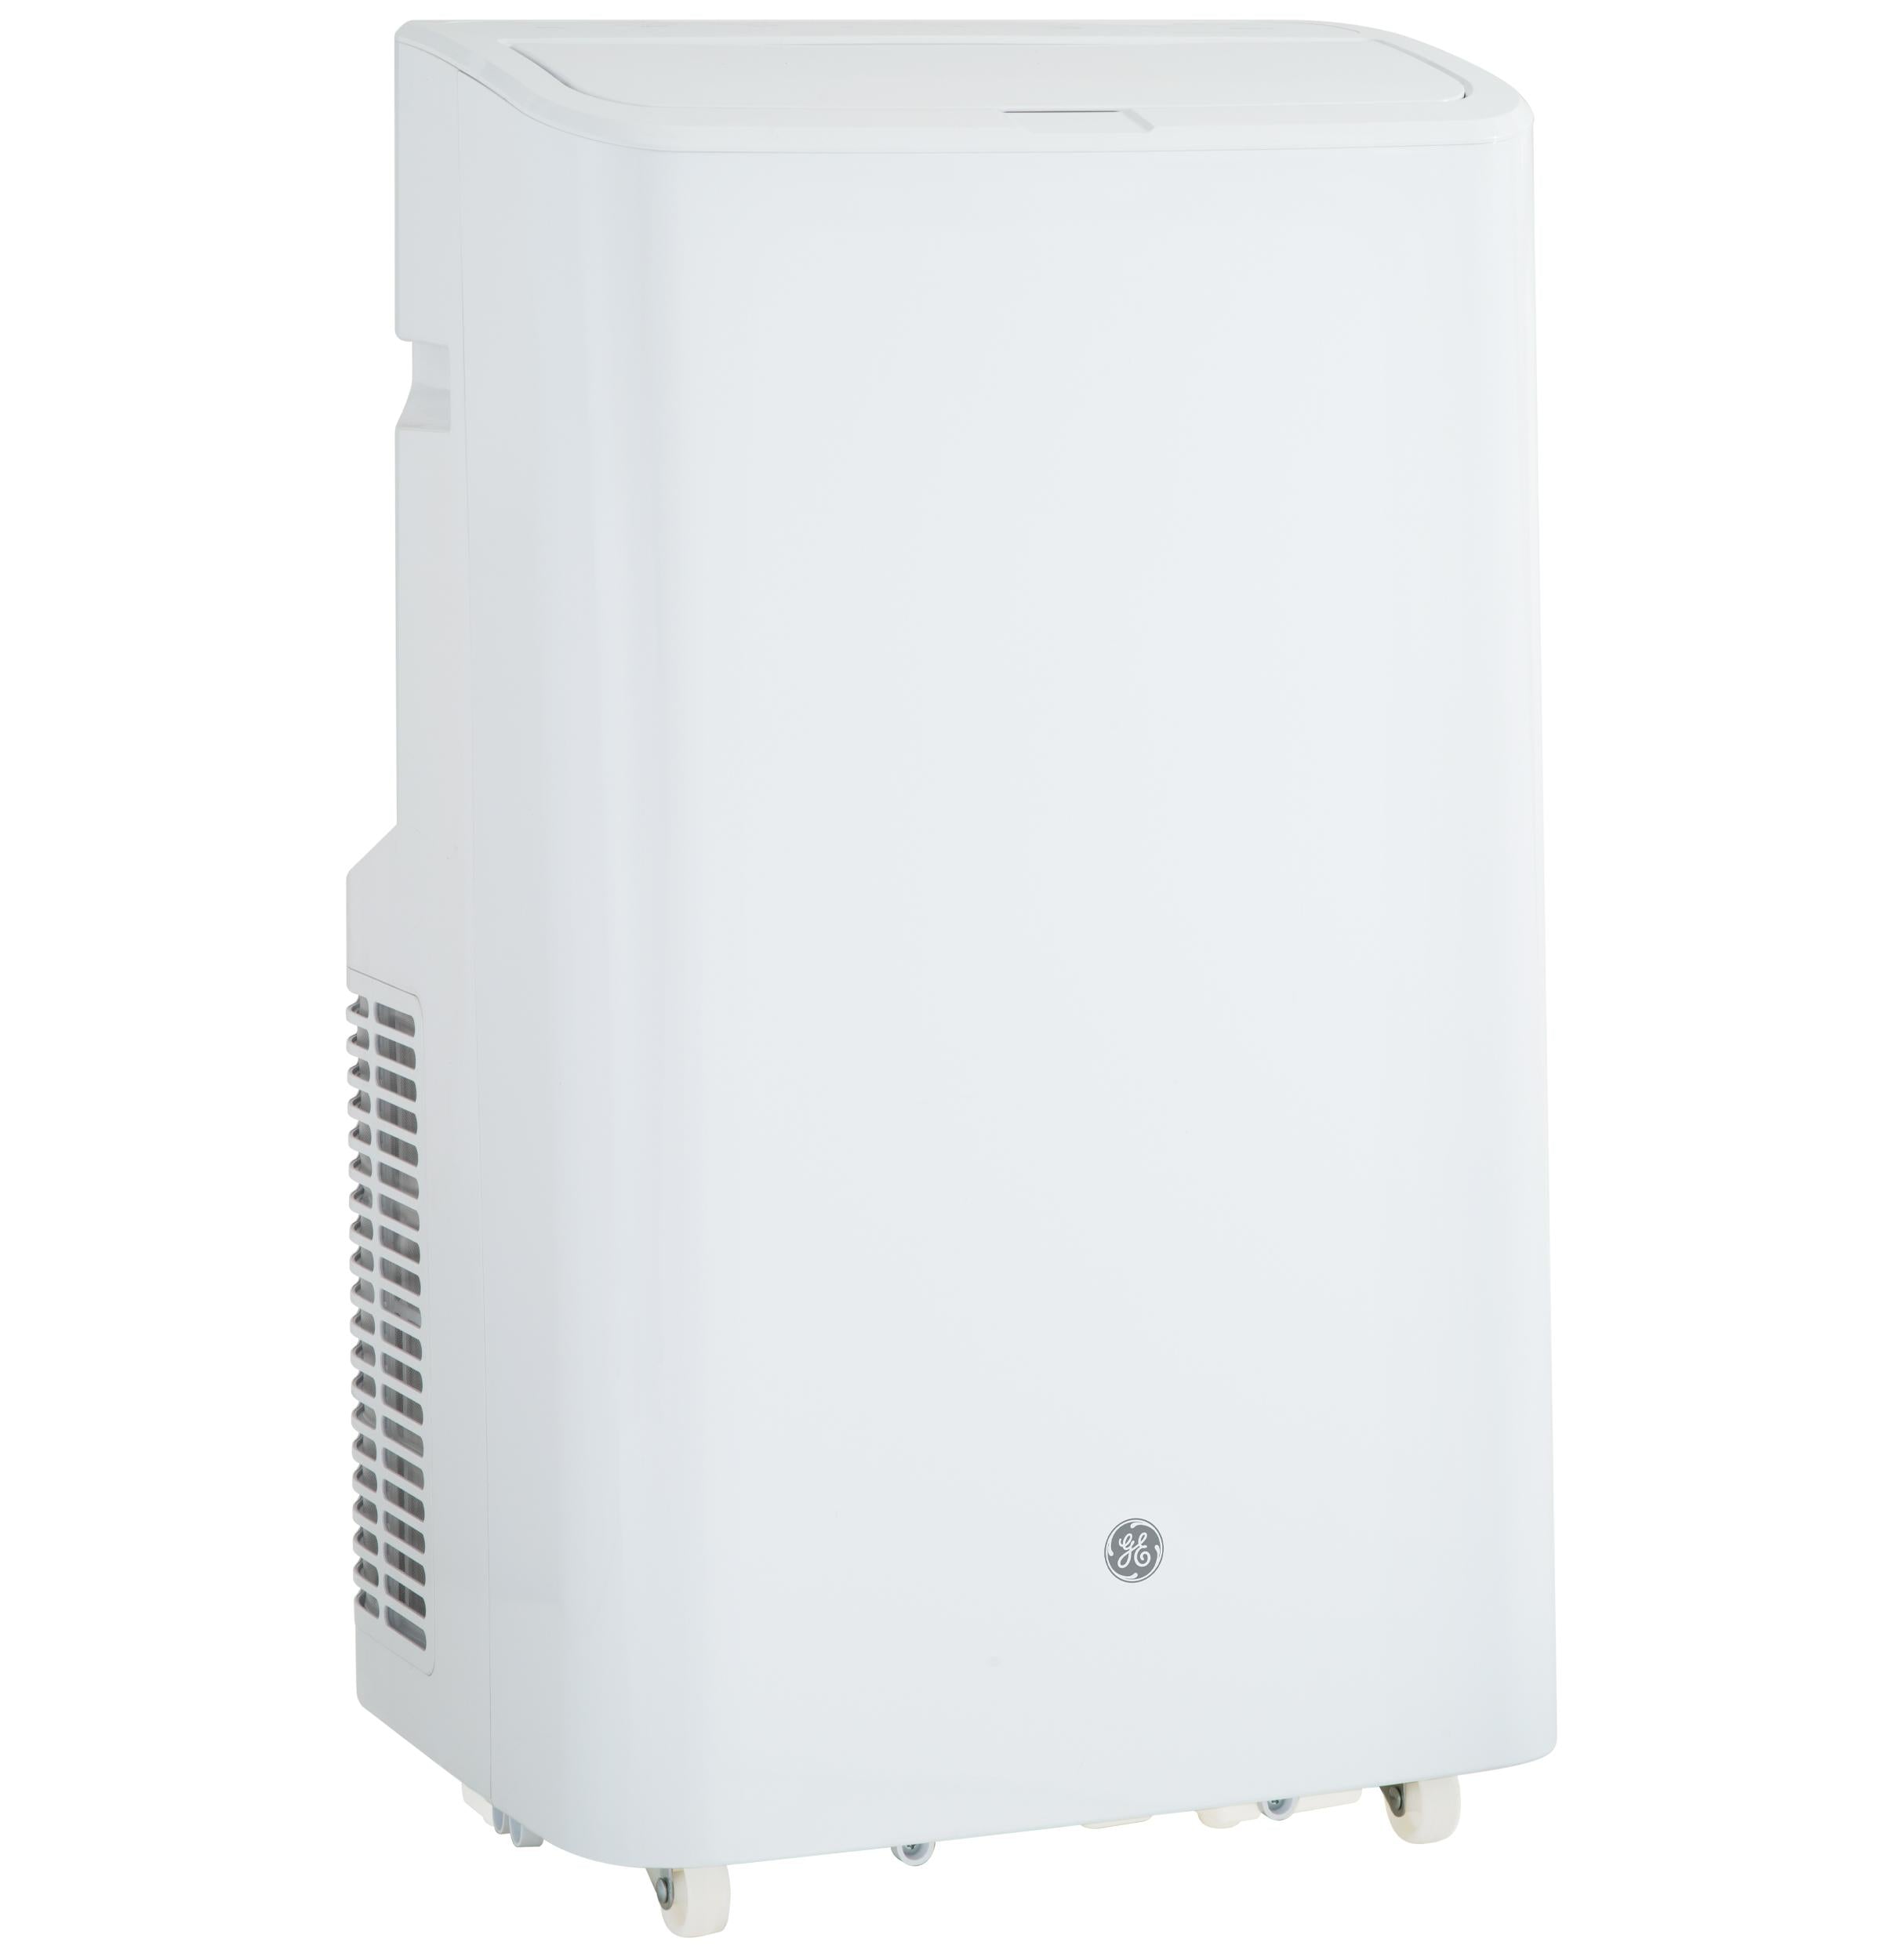 Ge Appliances APCD08JASW Ge® 8,500 Btu Portable Air Conditioner With Dehumifier And Remote, White